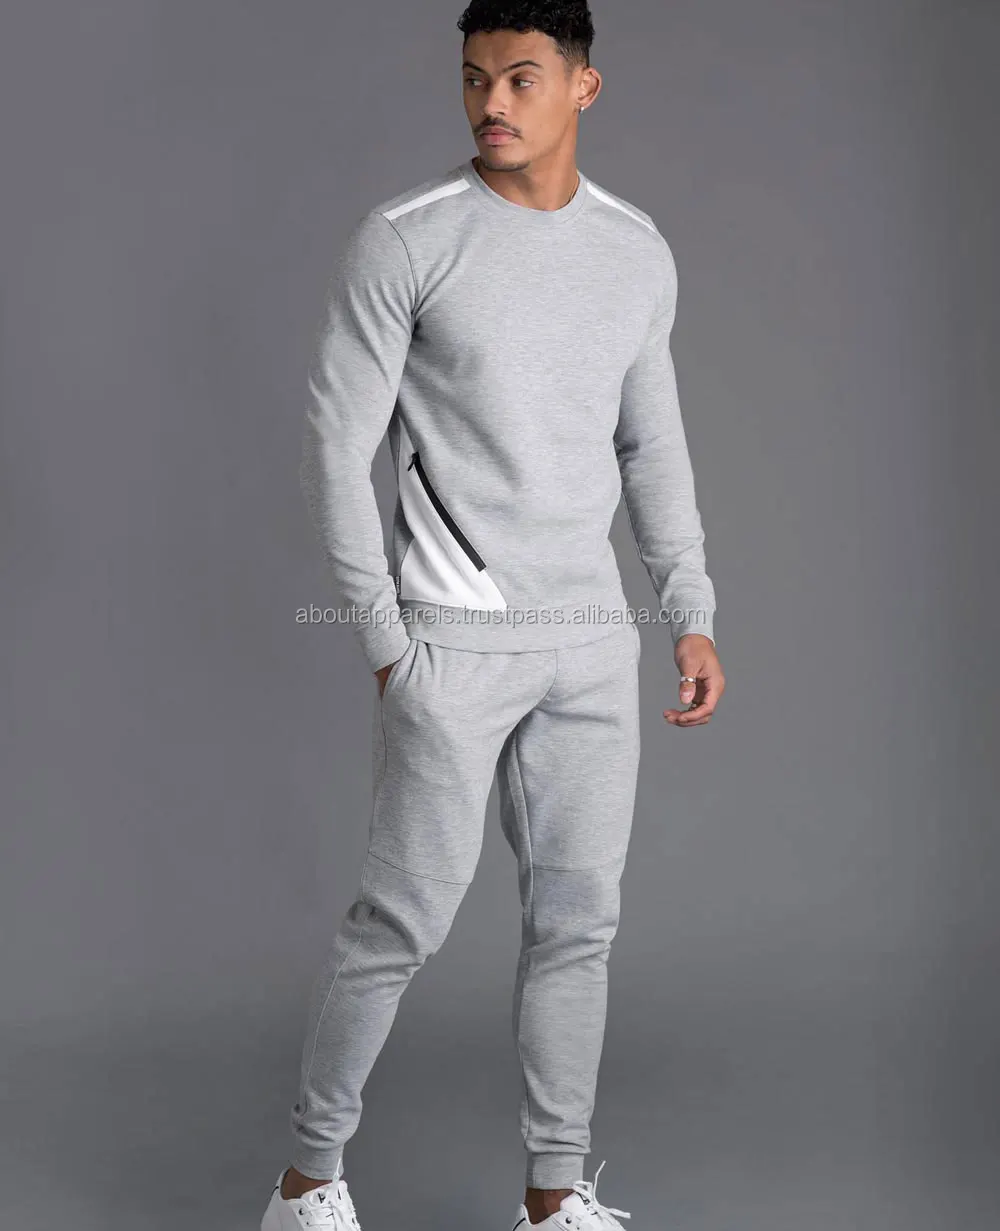 Wholesale Blank Jogging Suits Mens Sweat Suit/custom Made Tracksuits ...